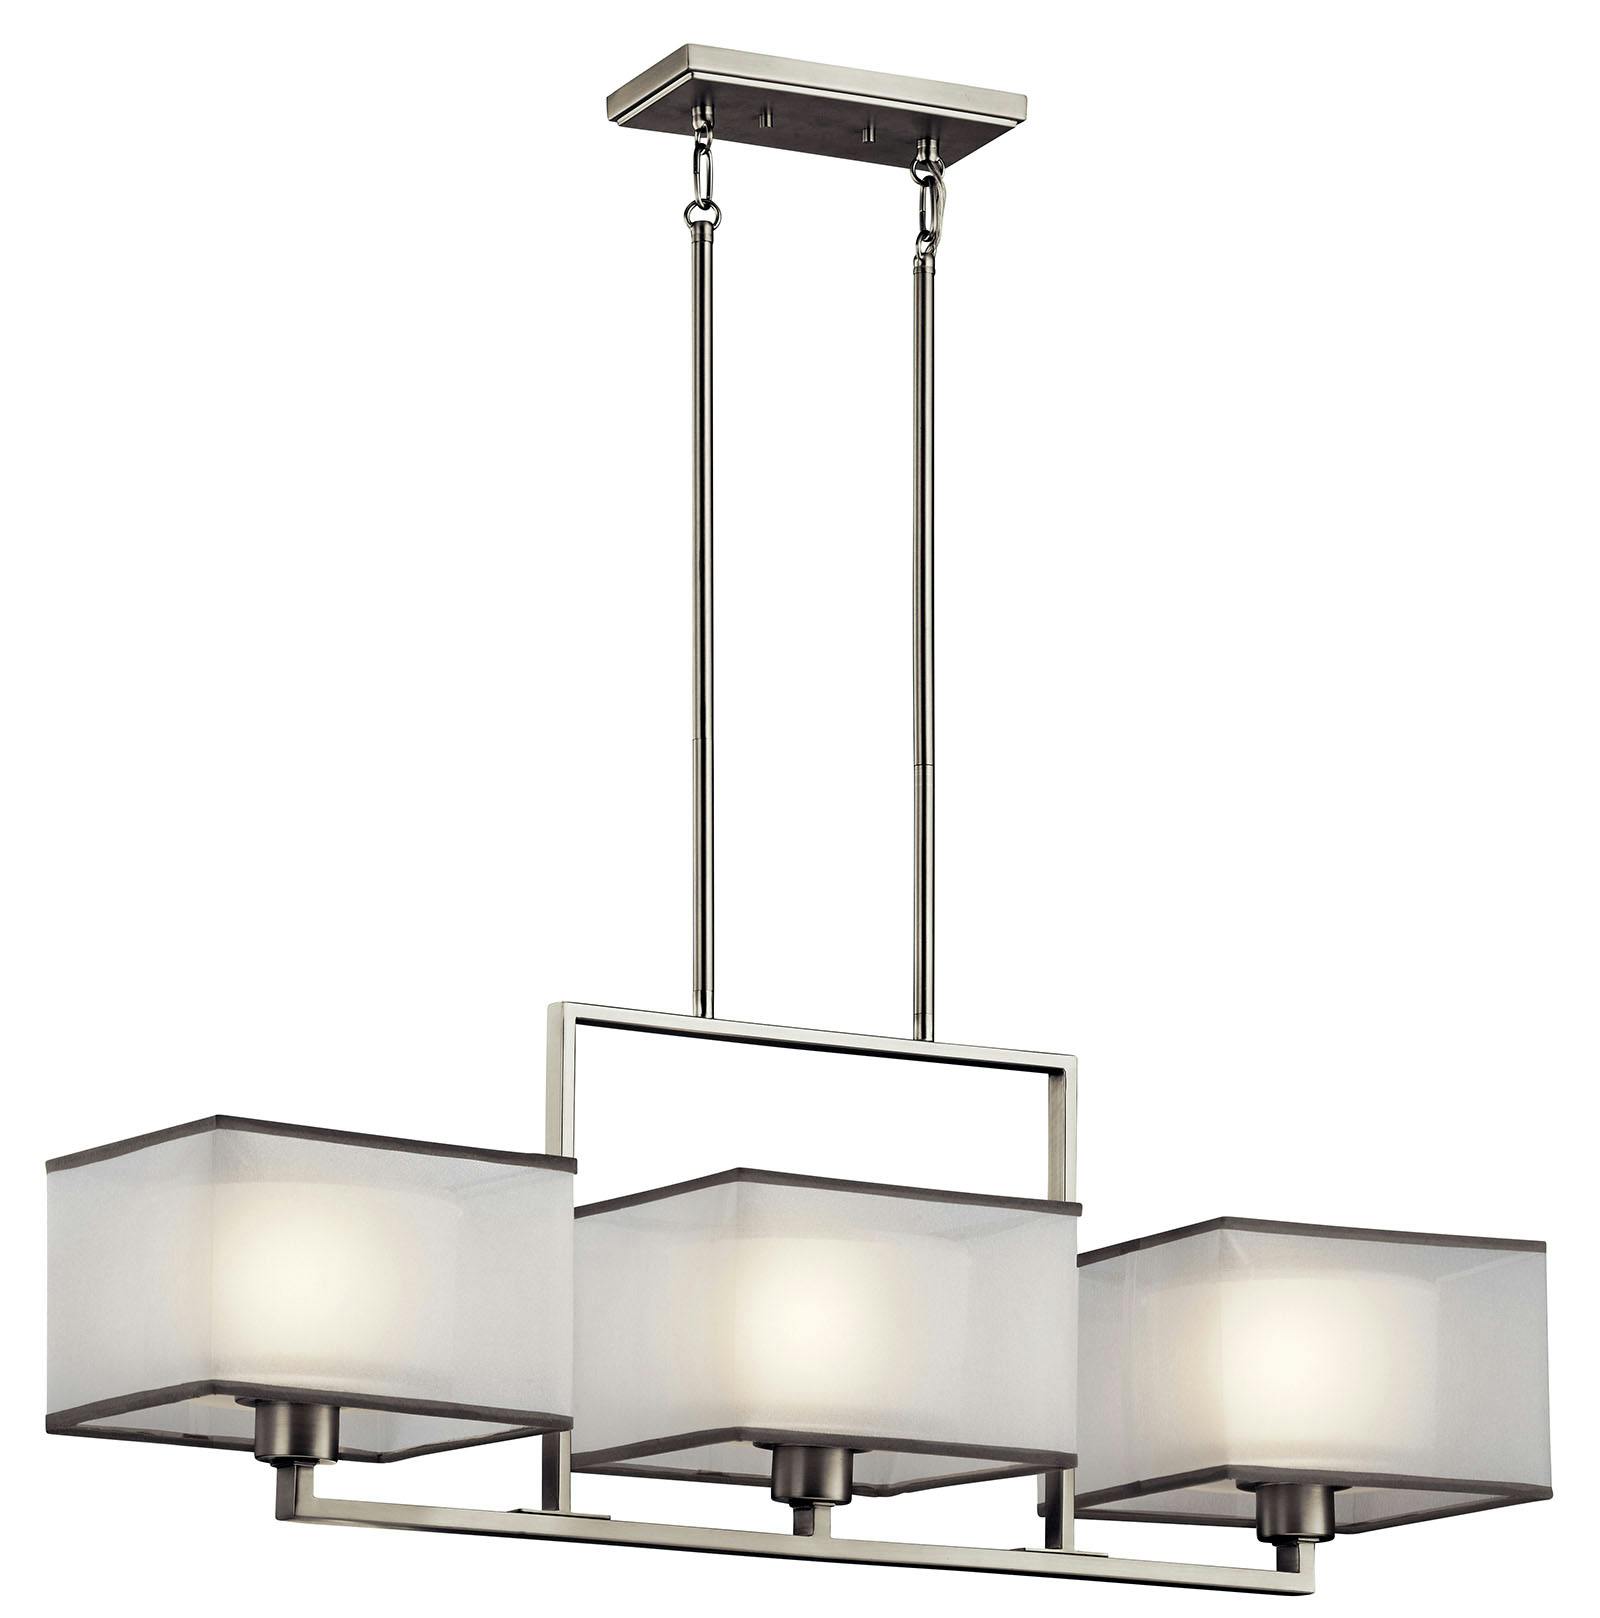 Kailey 3 Light Linear Chandelier Nickel on a white background